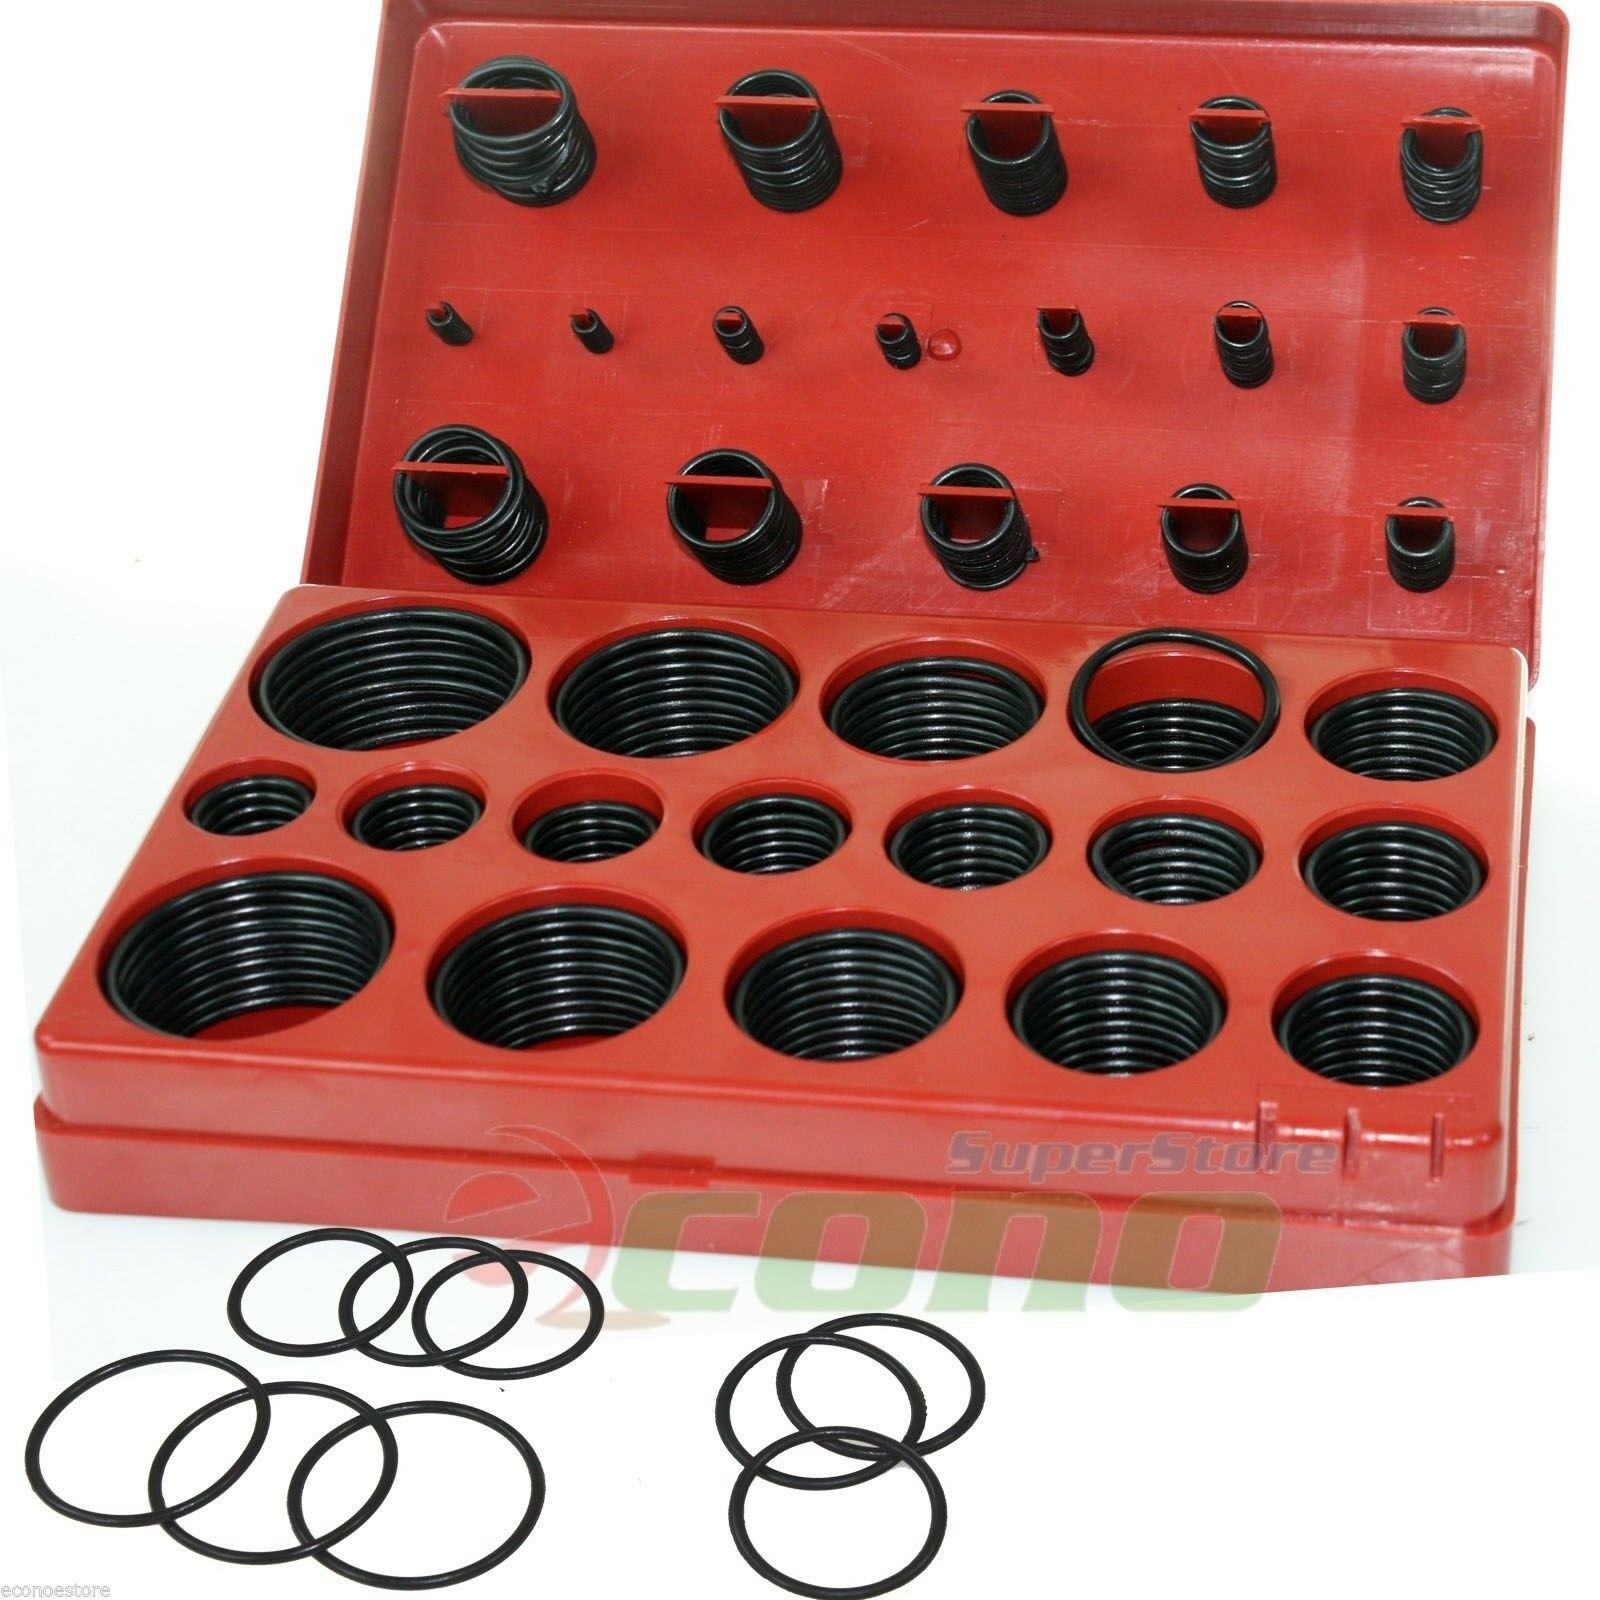 407pc Universal O Ring Assortment Set Sae Kit Automotive Seal Rubber Gaskets Econosuperstore 